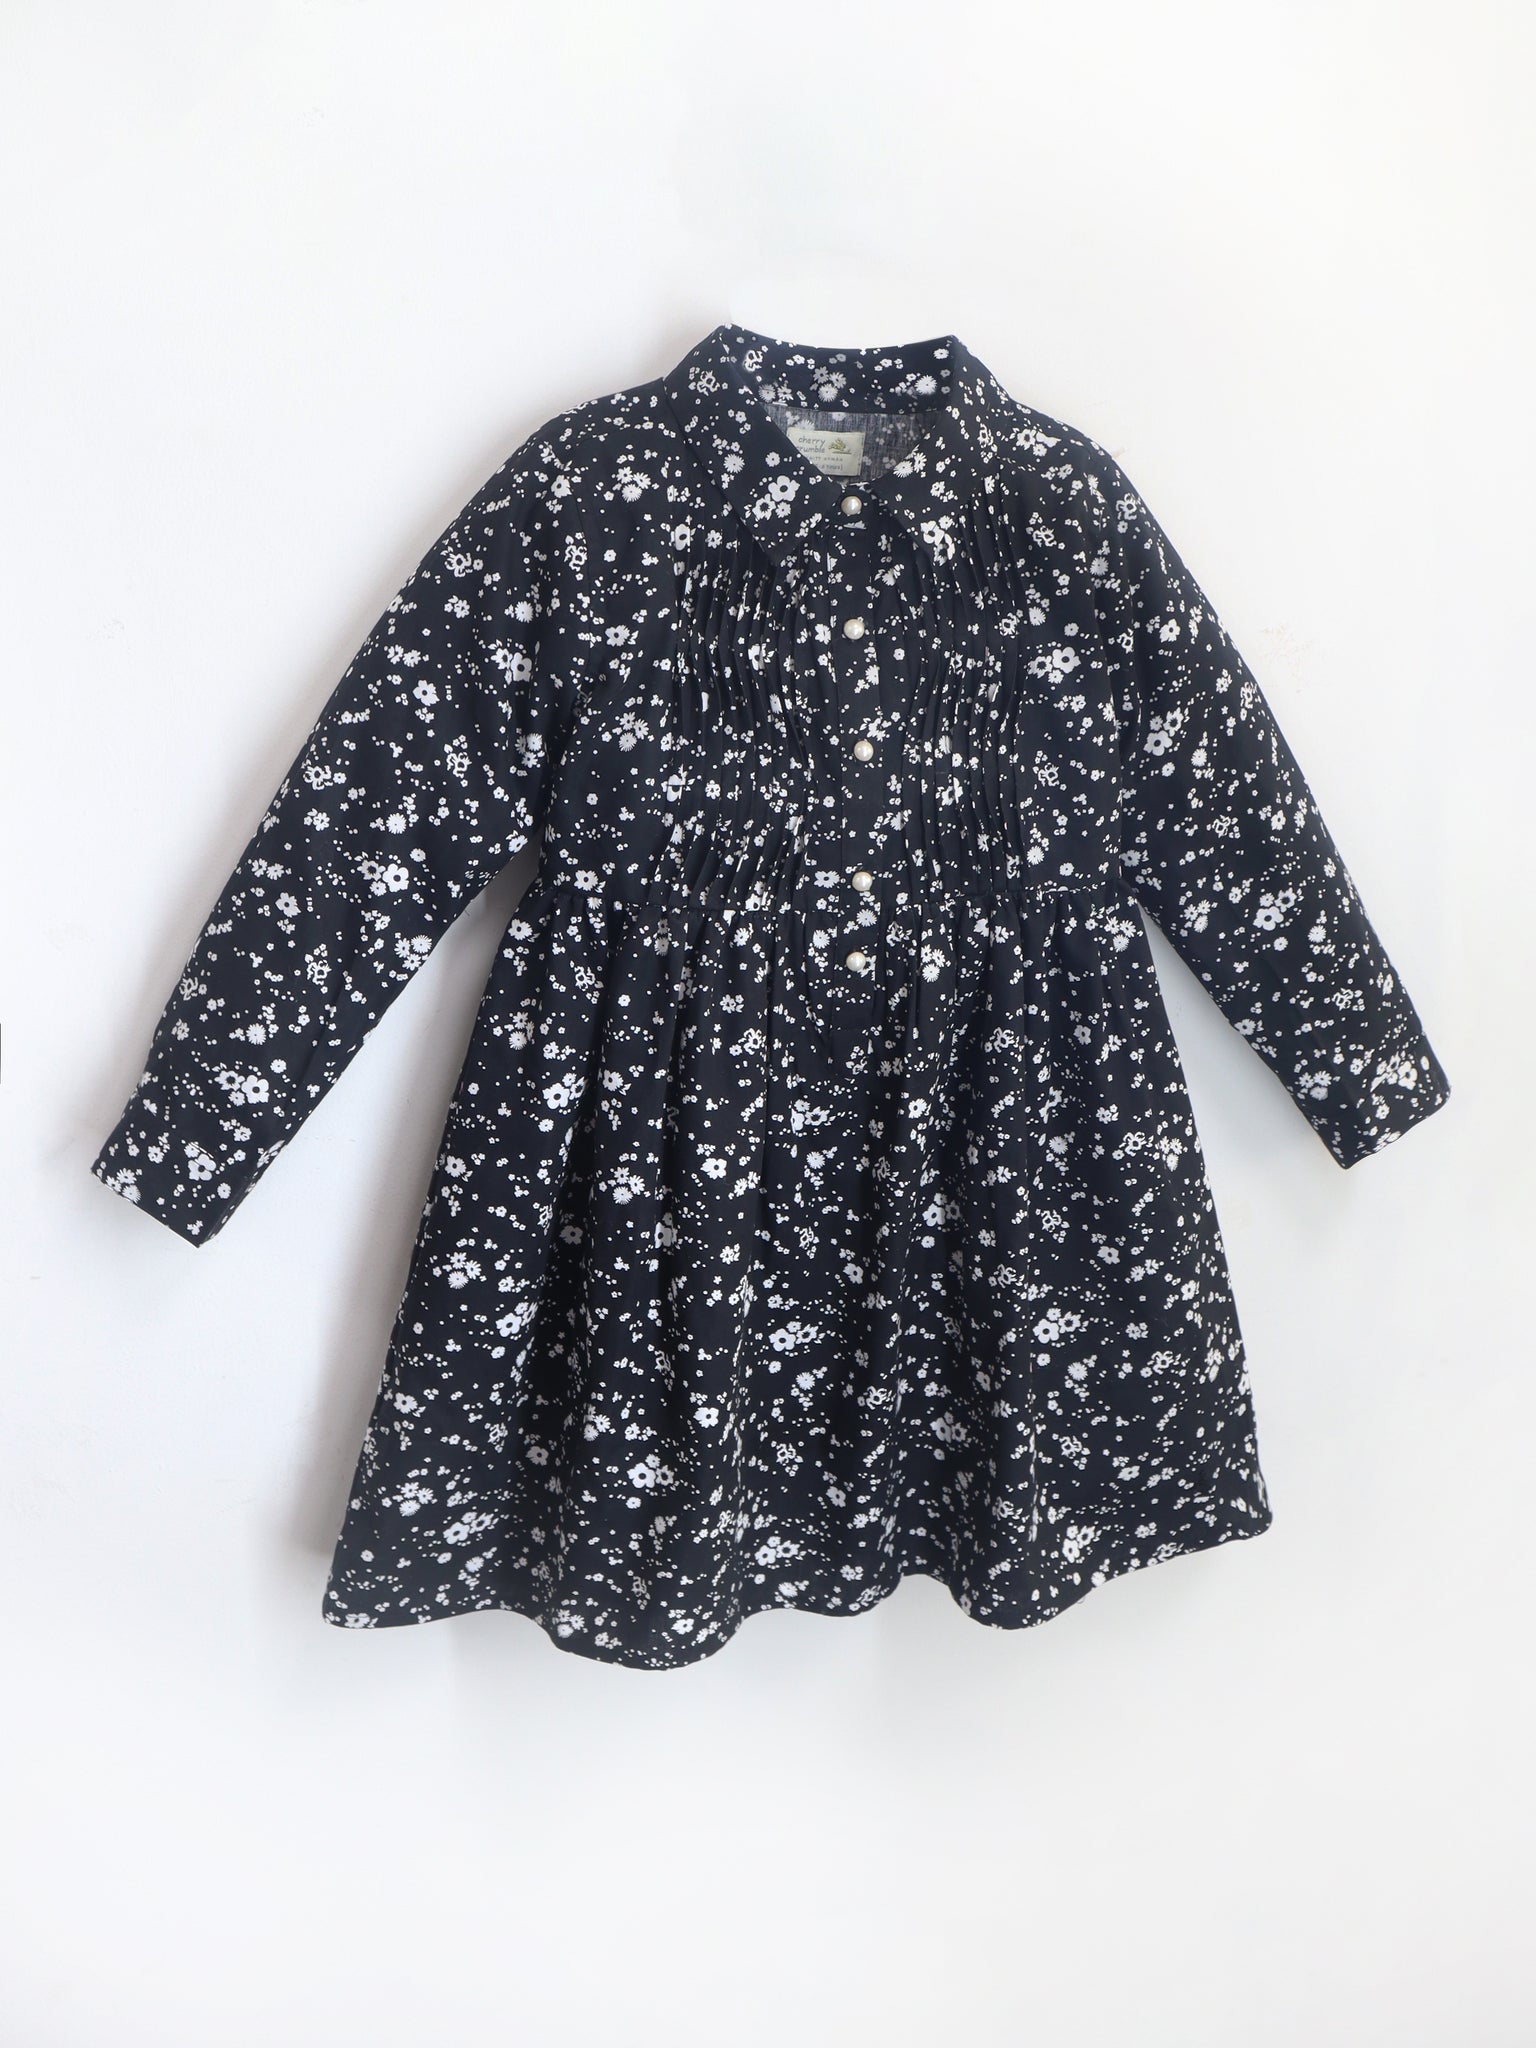 Smart Casual Black Cotton Cuffed Sleeves with Shirt Collar Summer Fit & Flare Dress For Girls